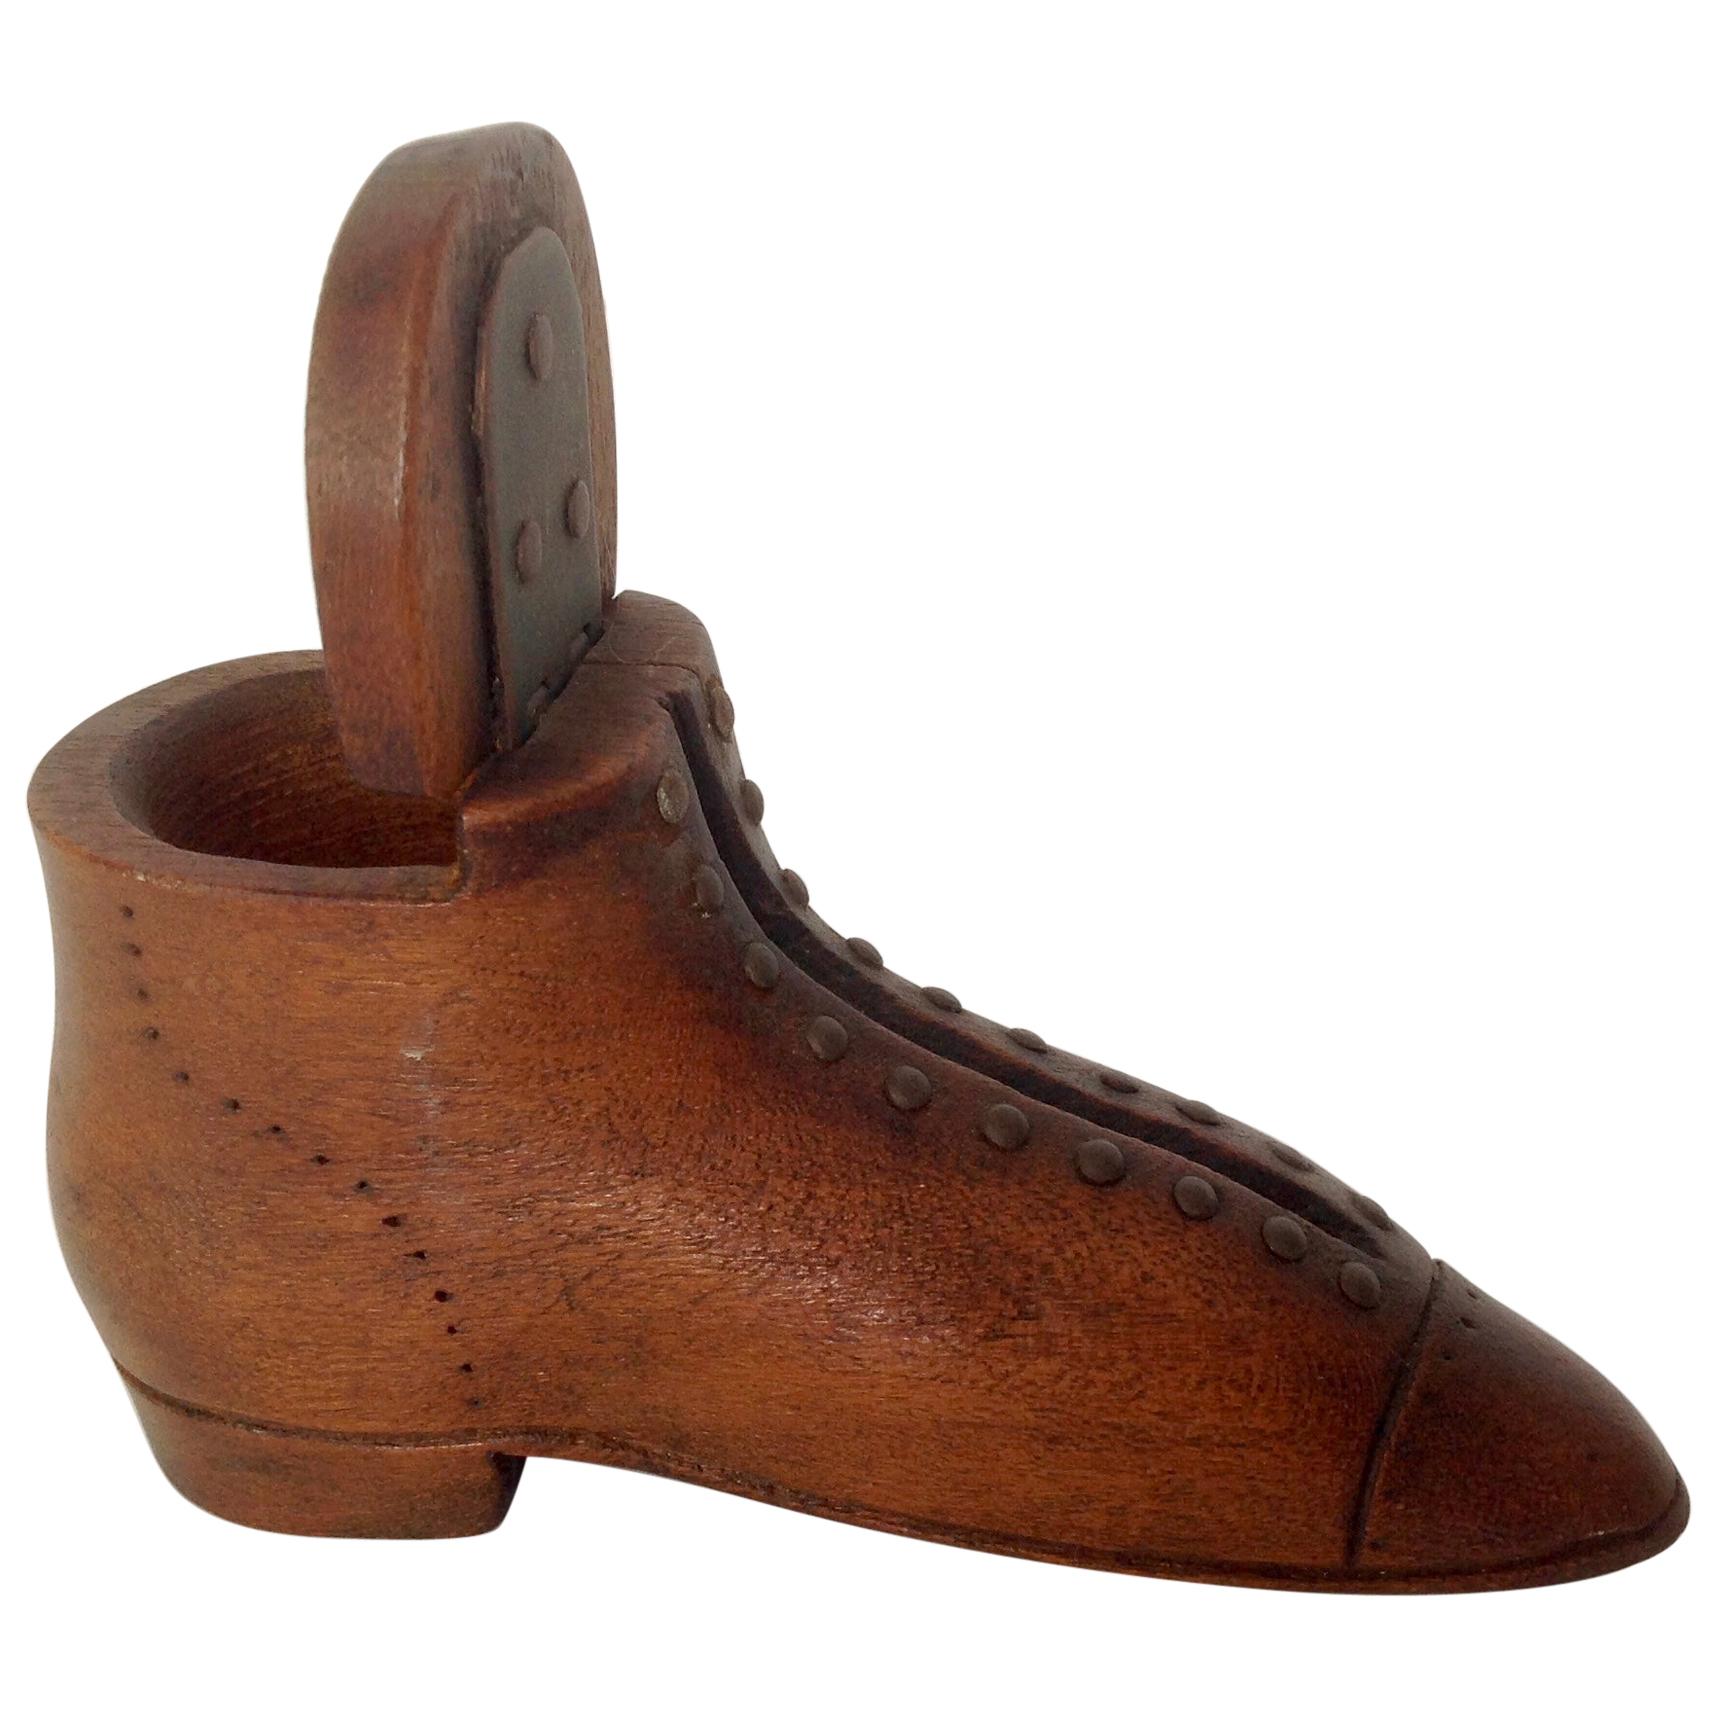 Georgian Snuff Box in the Form of a Shoe